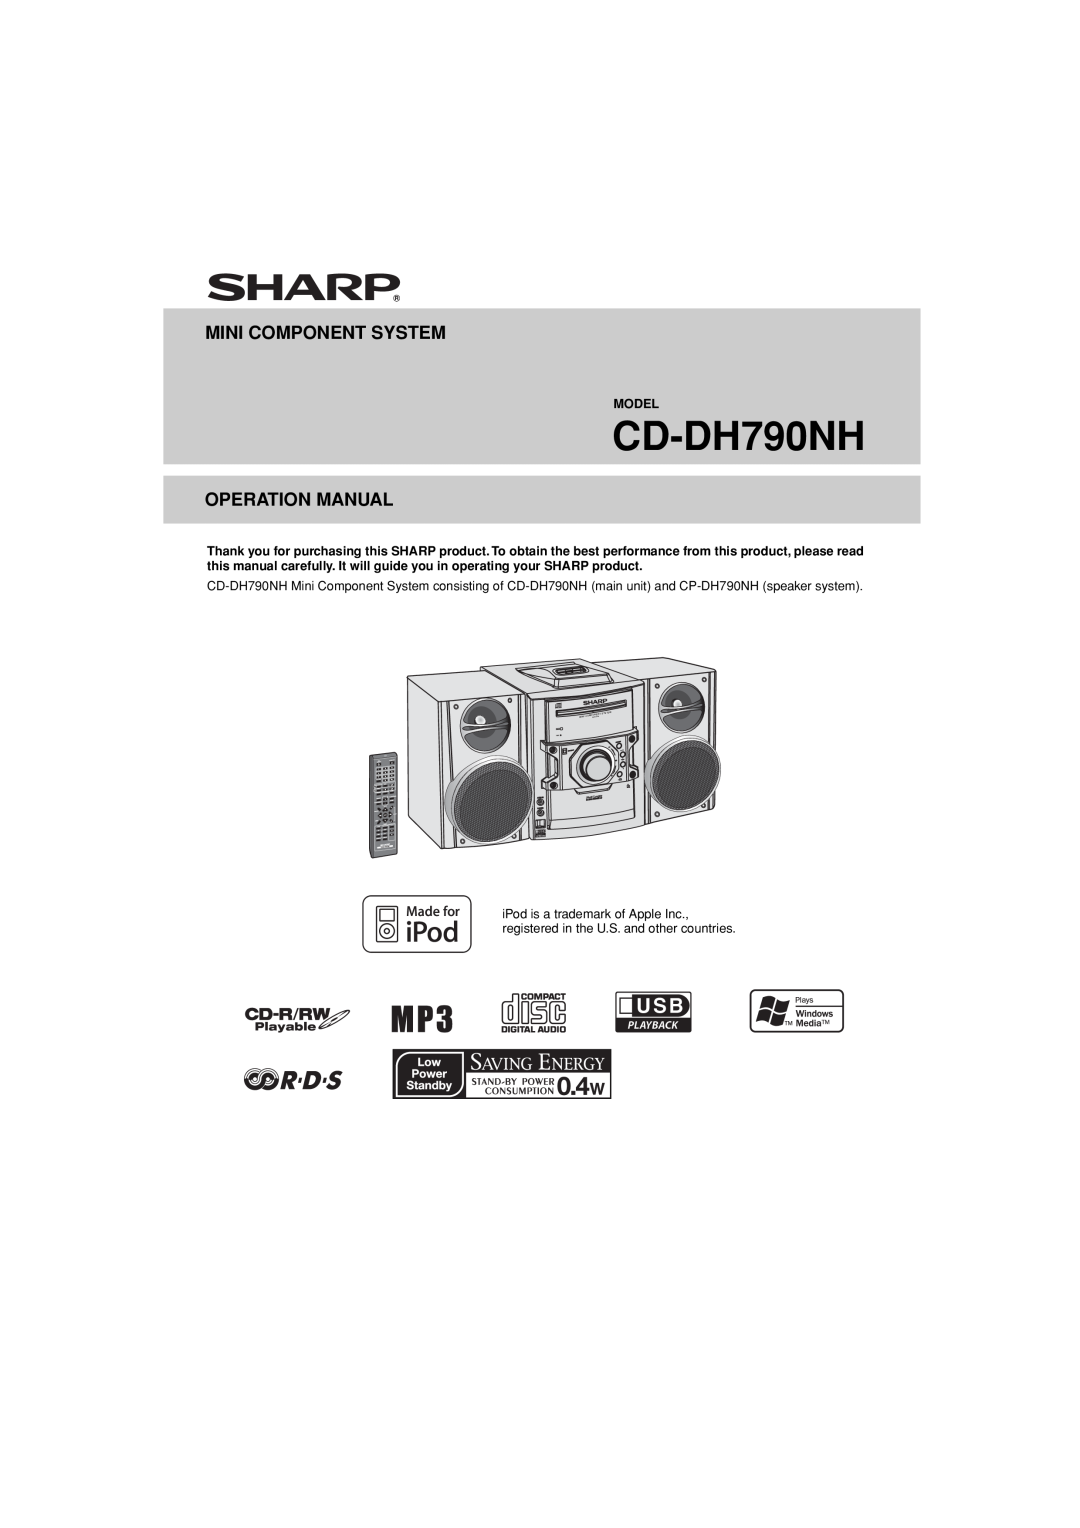 Sharp CD-DH790NH operation manual Mini Component System, Operation Manual 